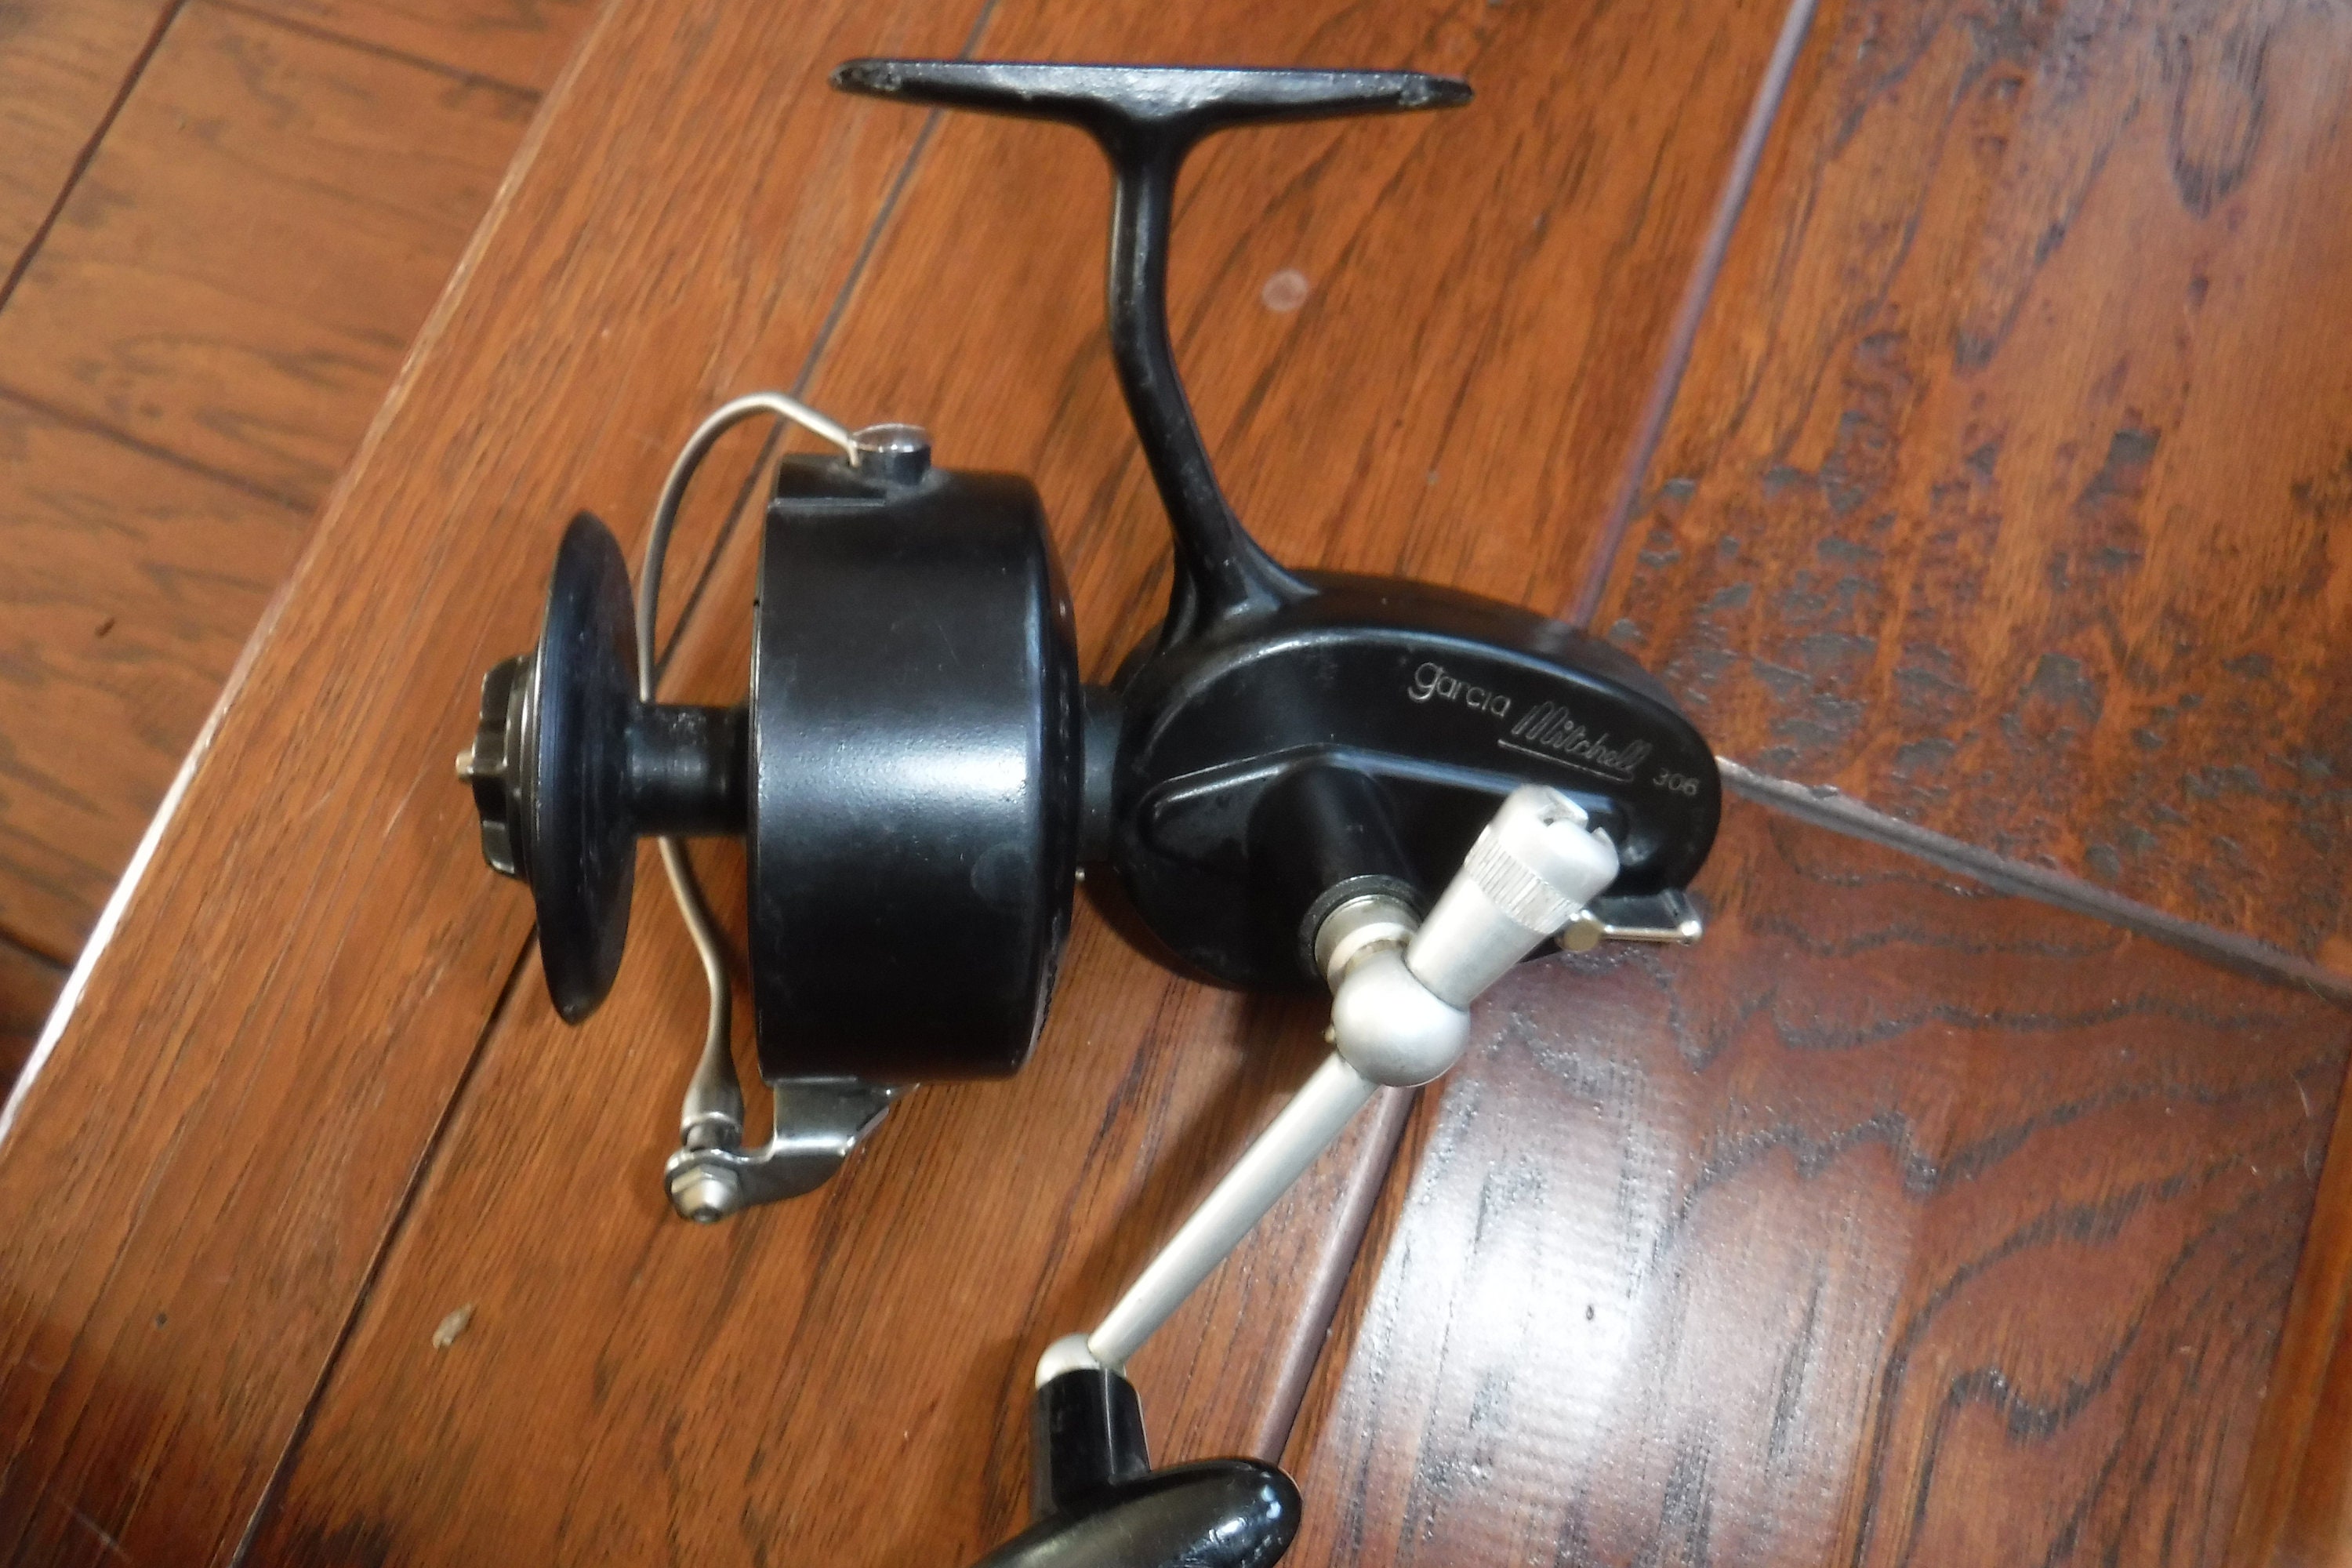 Garcia mitchell 402 saltwater fishing reel - sporting goods - by